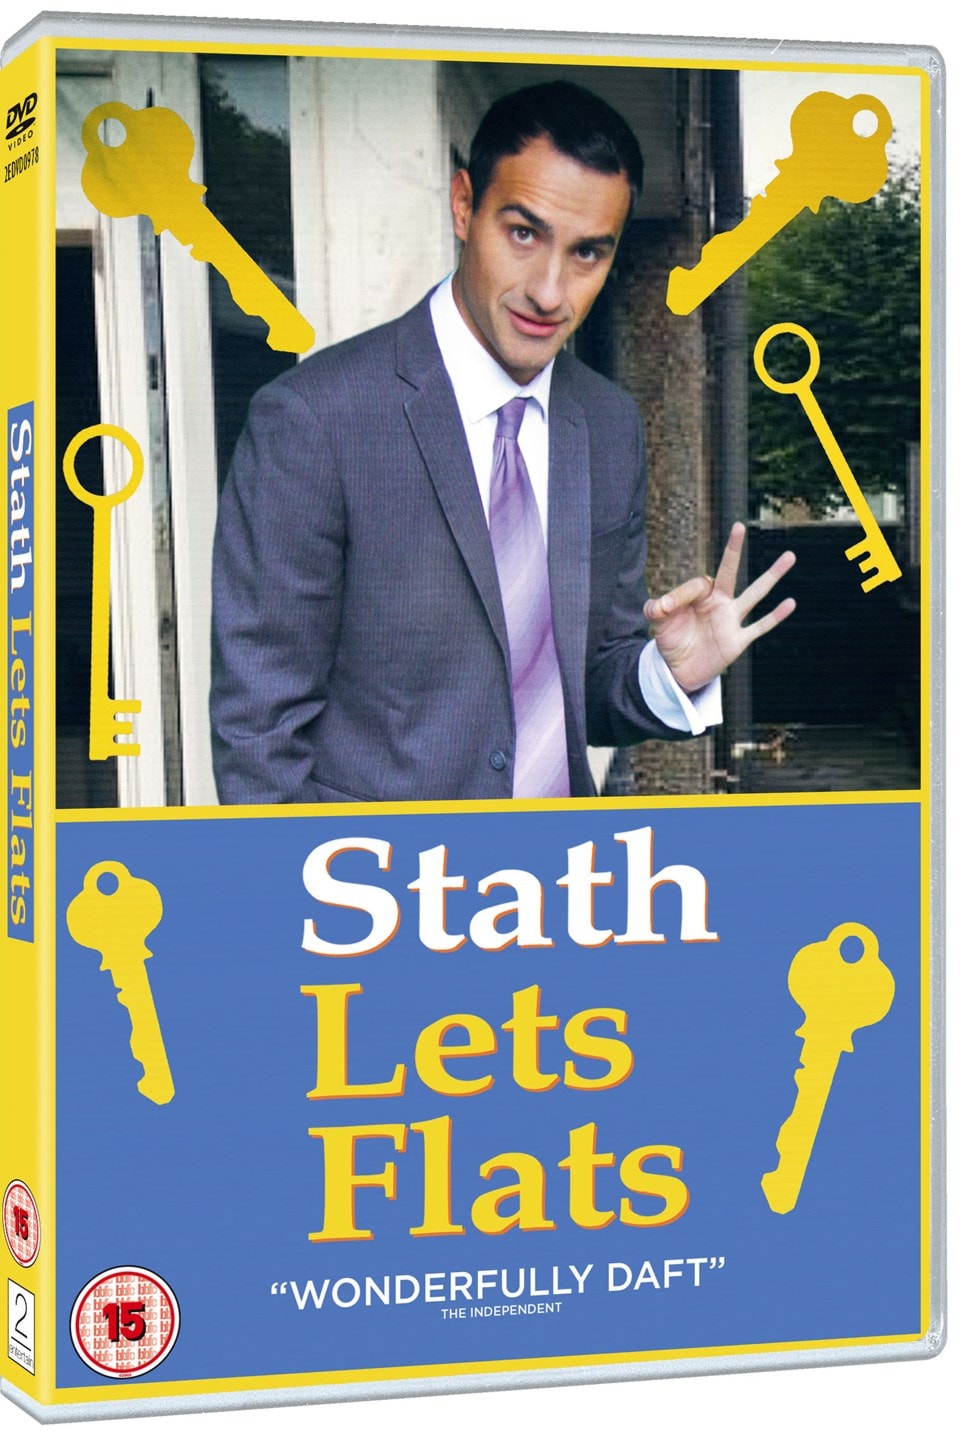 stath lets flats s2